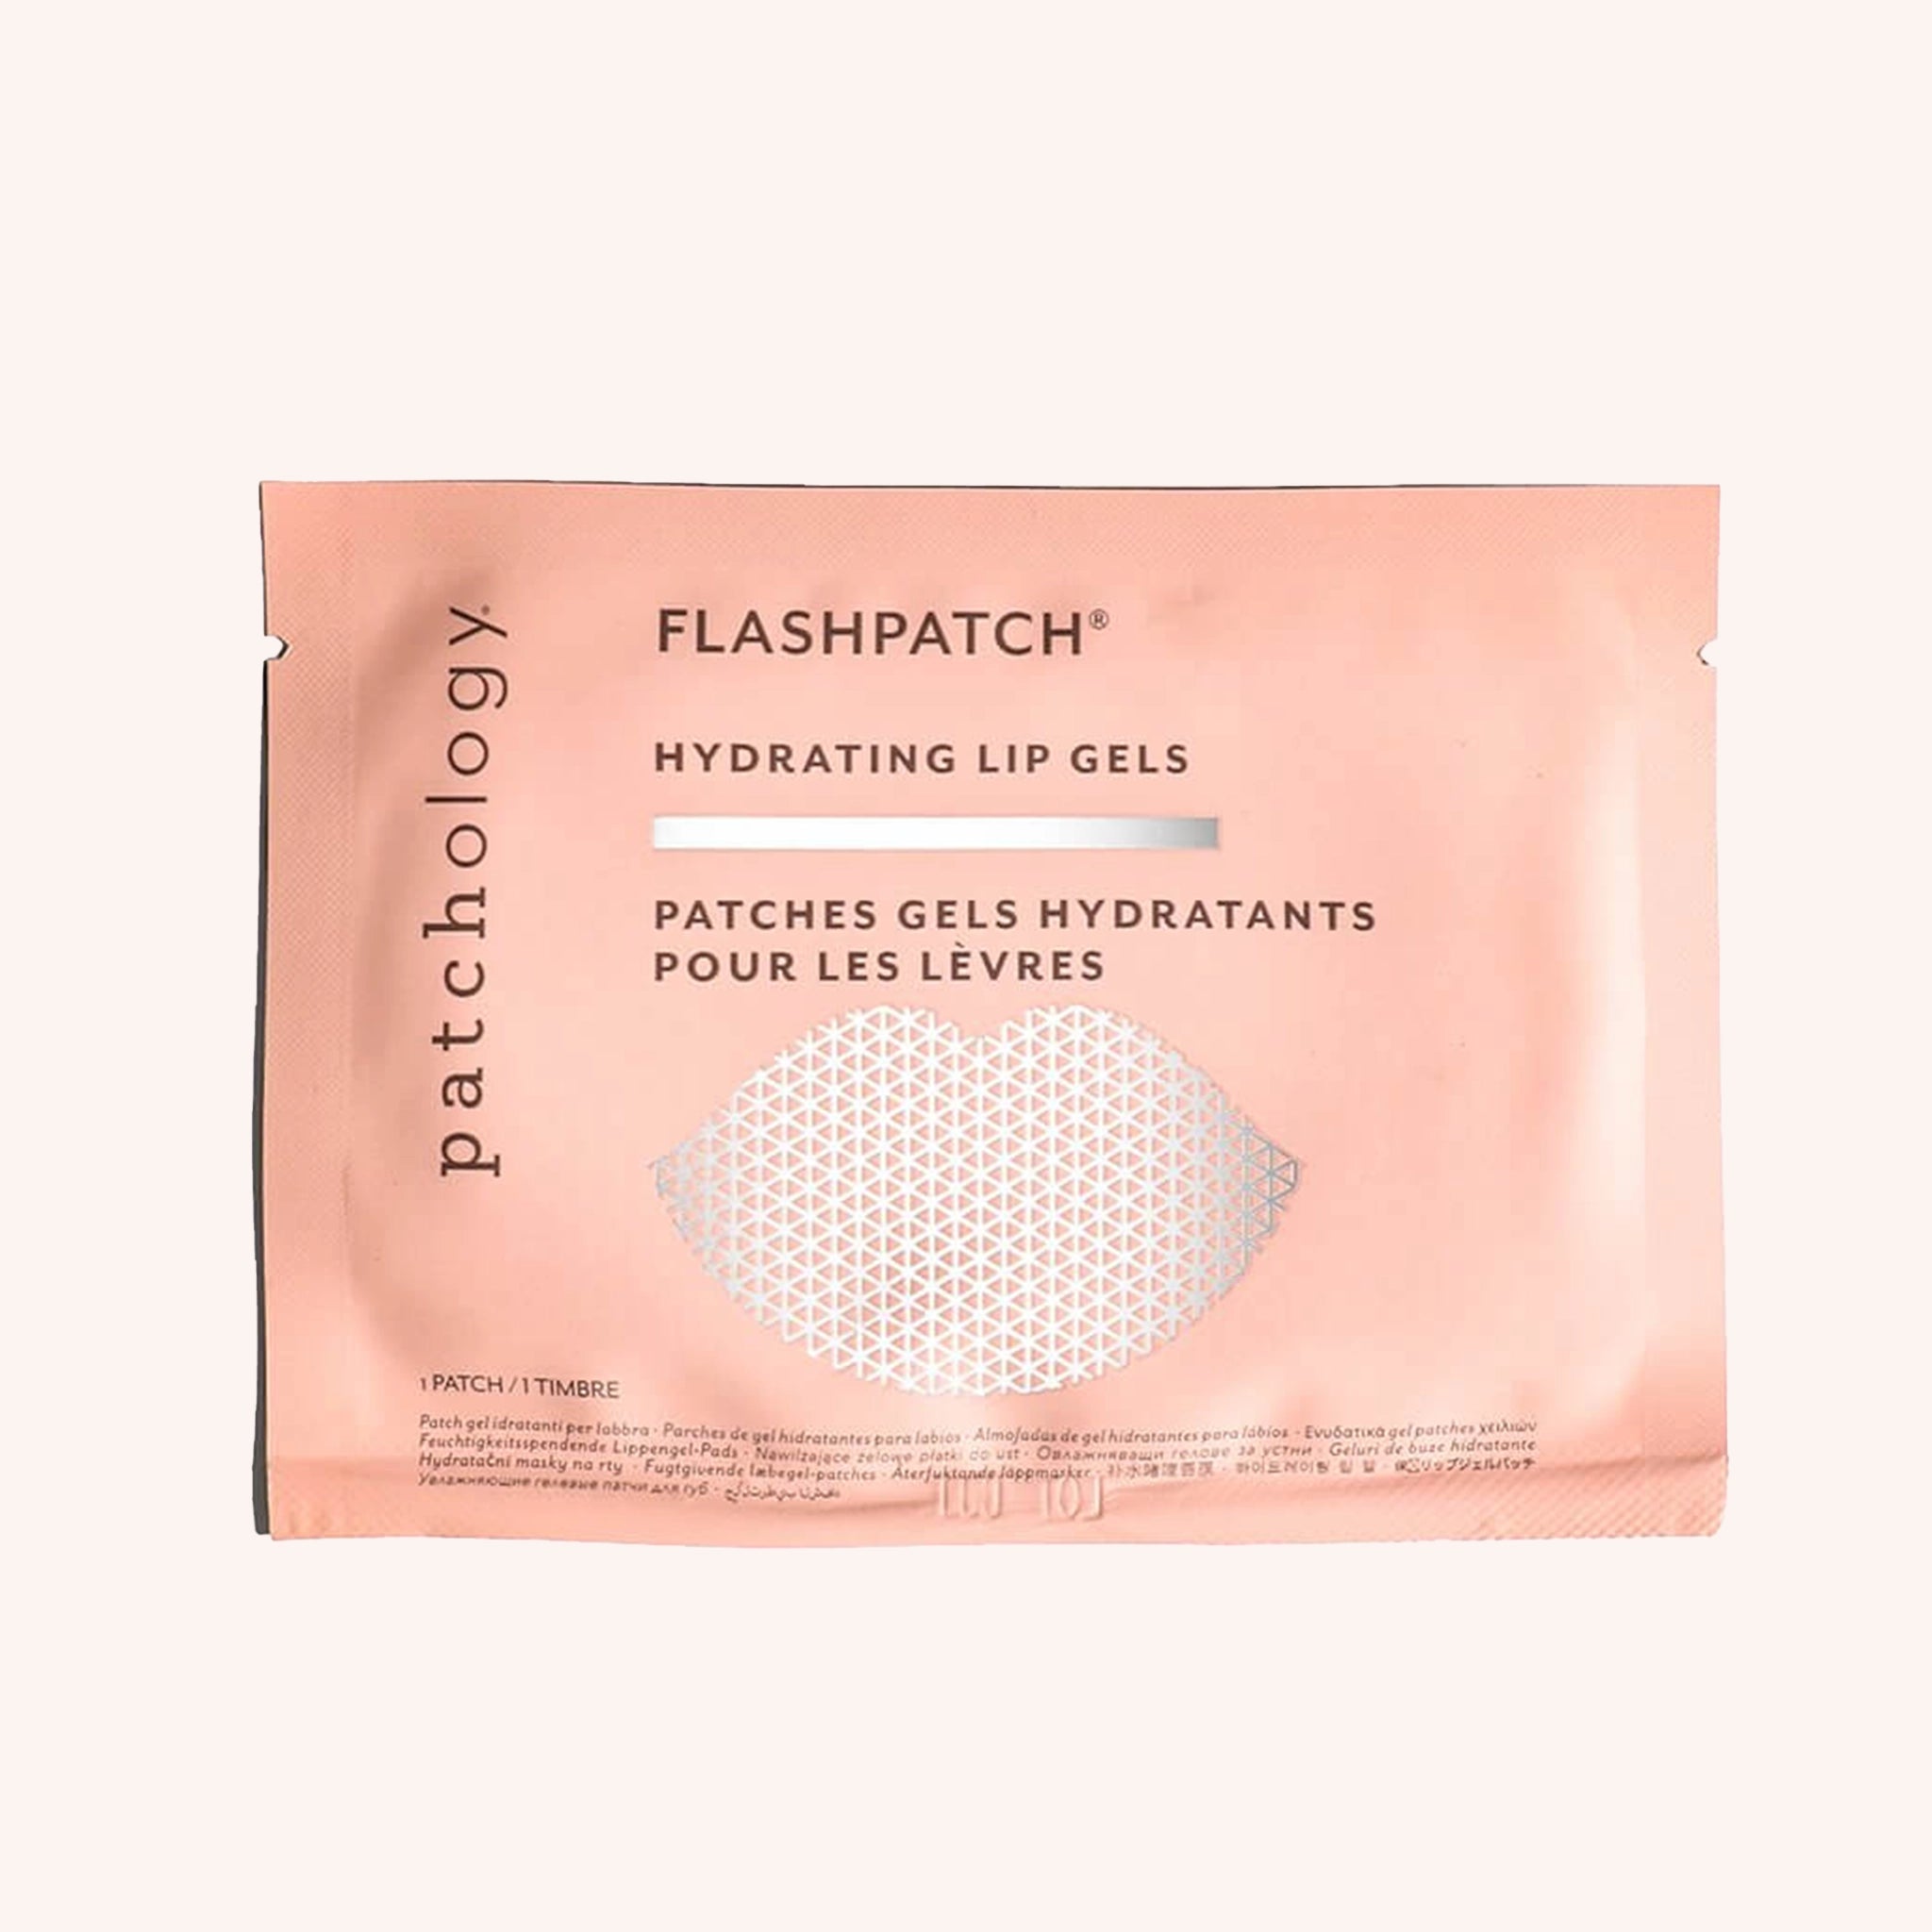 The pink packet that the lip mask comes in featuring black text that reads, "Flashpatch Hydrating Lip Gels".